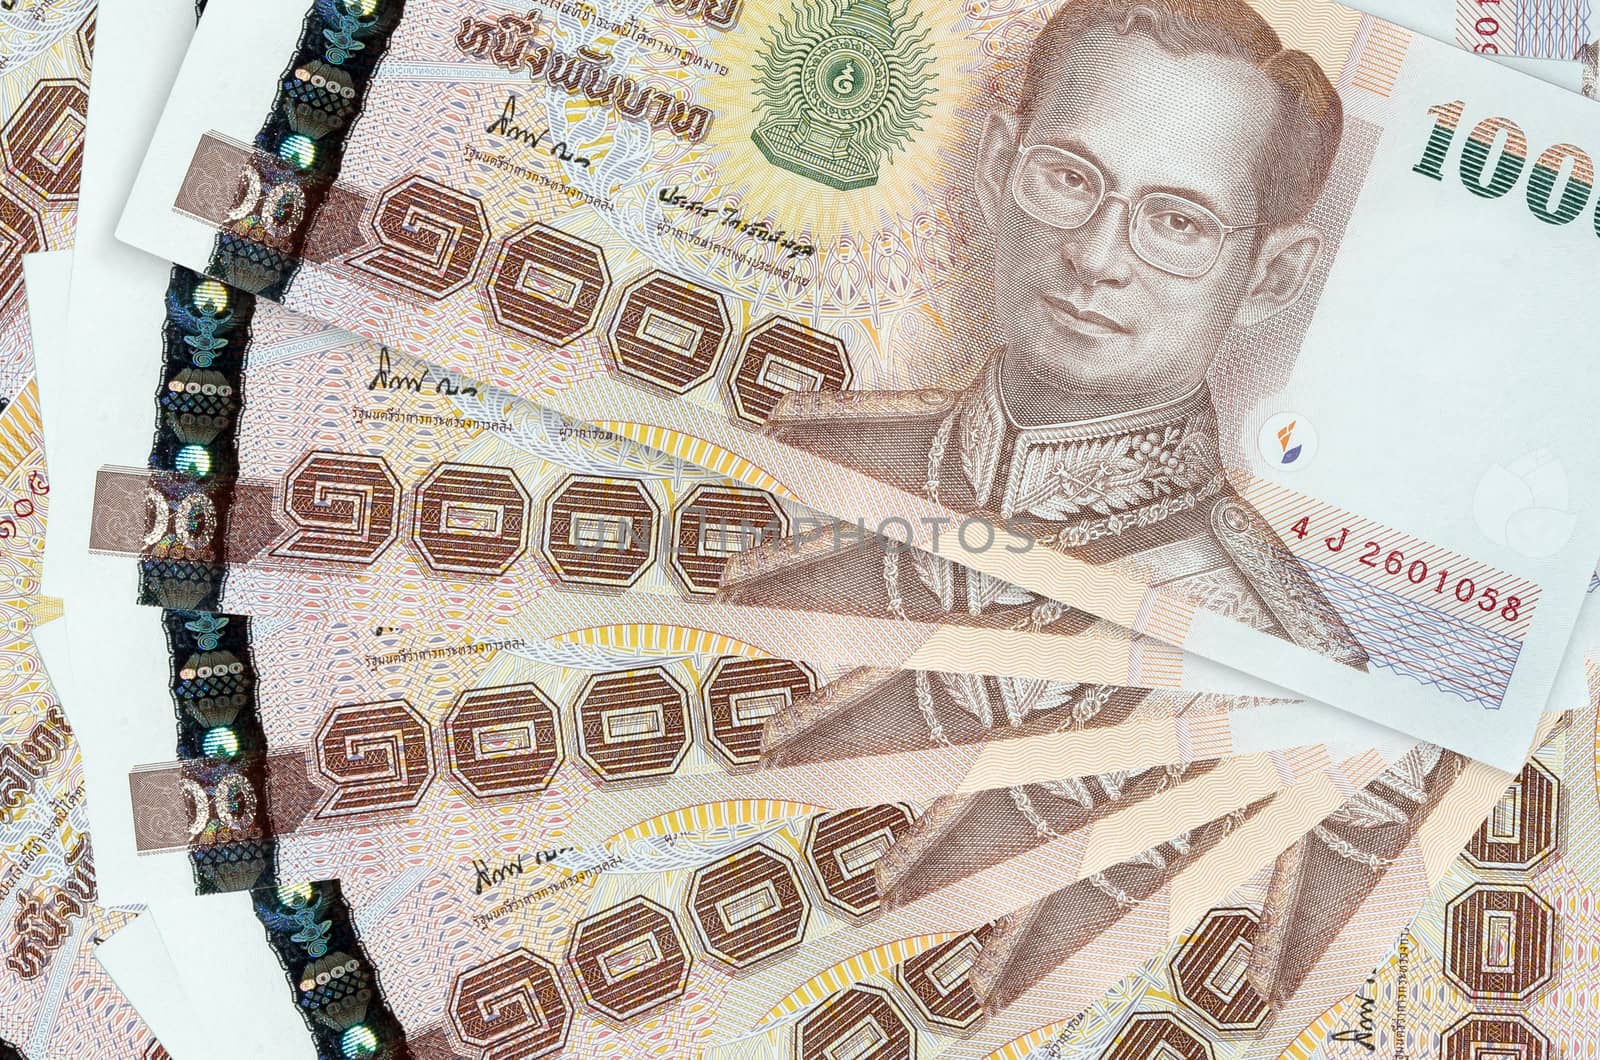 1000 thai bahte banknote stack